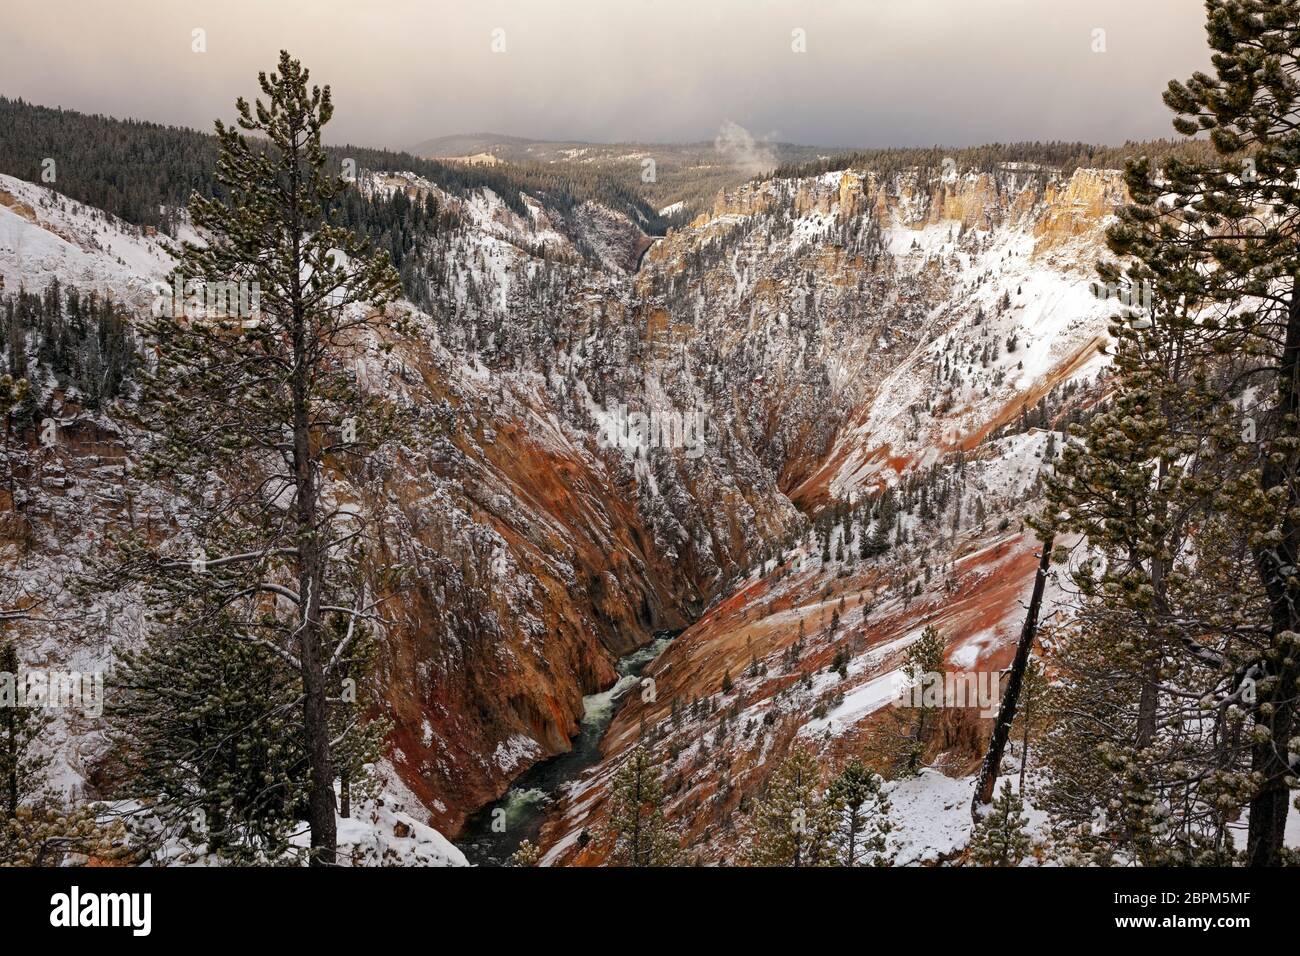 WY04406-00...WYOMING - Colorful walls of the Grand Canyon of the Yellowstone River on a cloudy day near Artist Point in Yellowstone National Park. Stock Photo